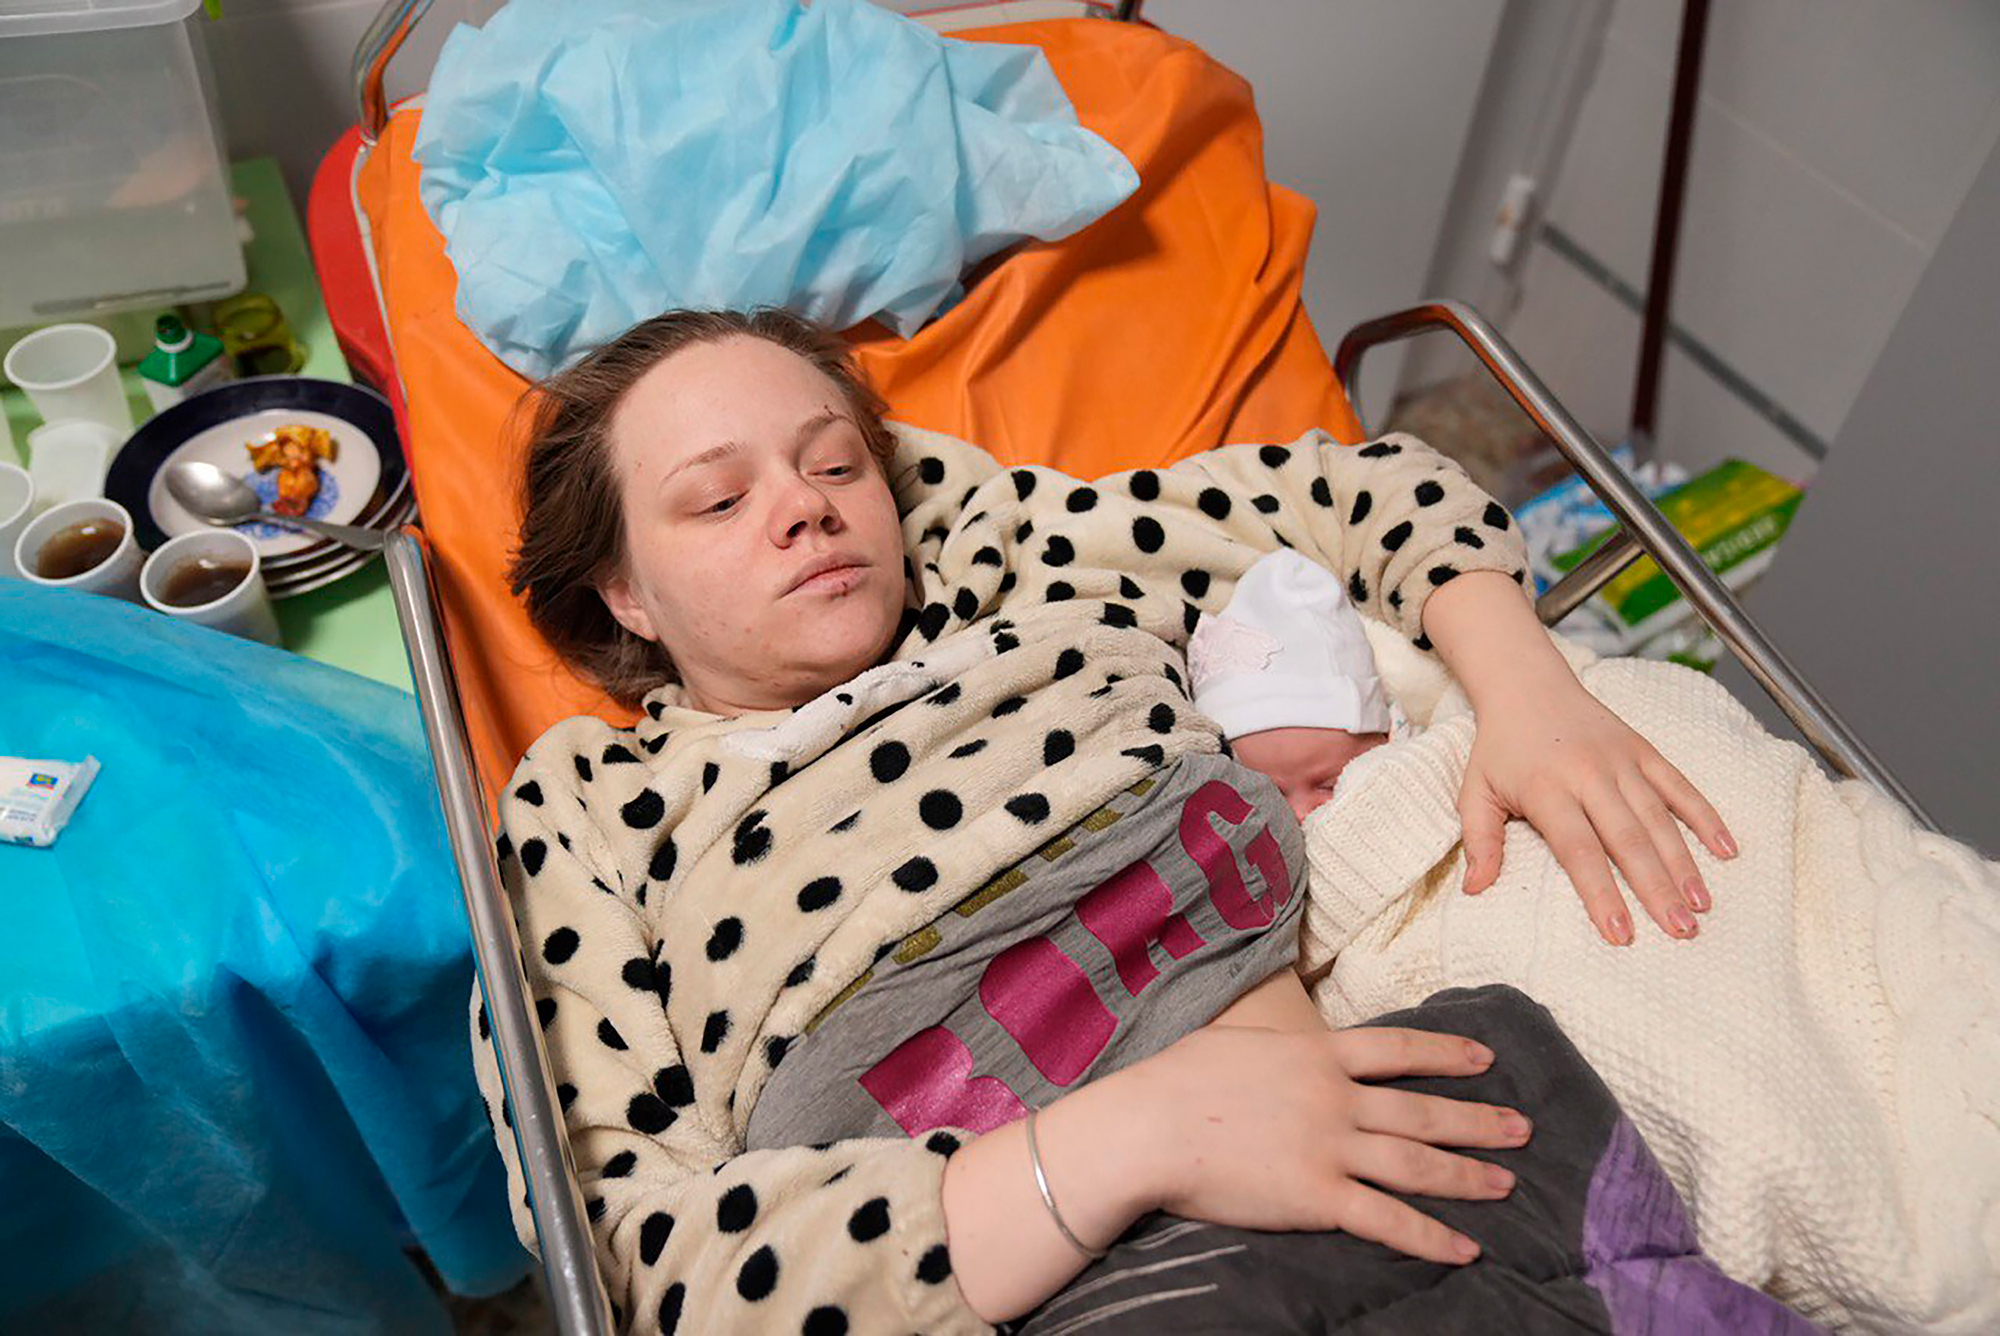 Vishegirskaya lies in a hospital bed after giving birth to her daughter Veronika on Friday in Mariupol.